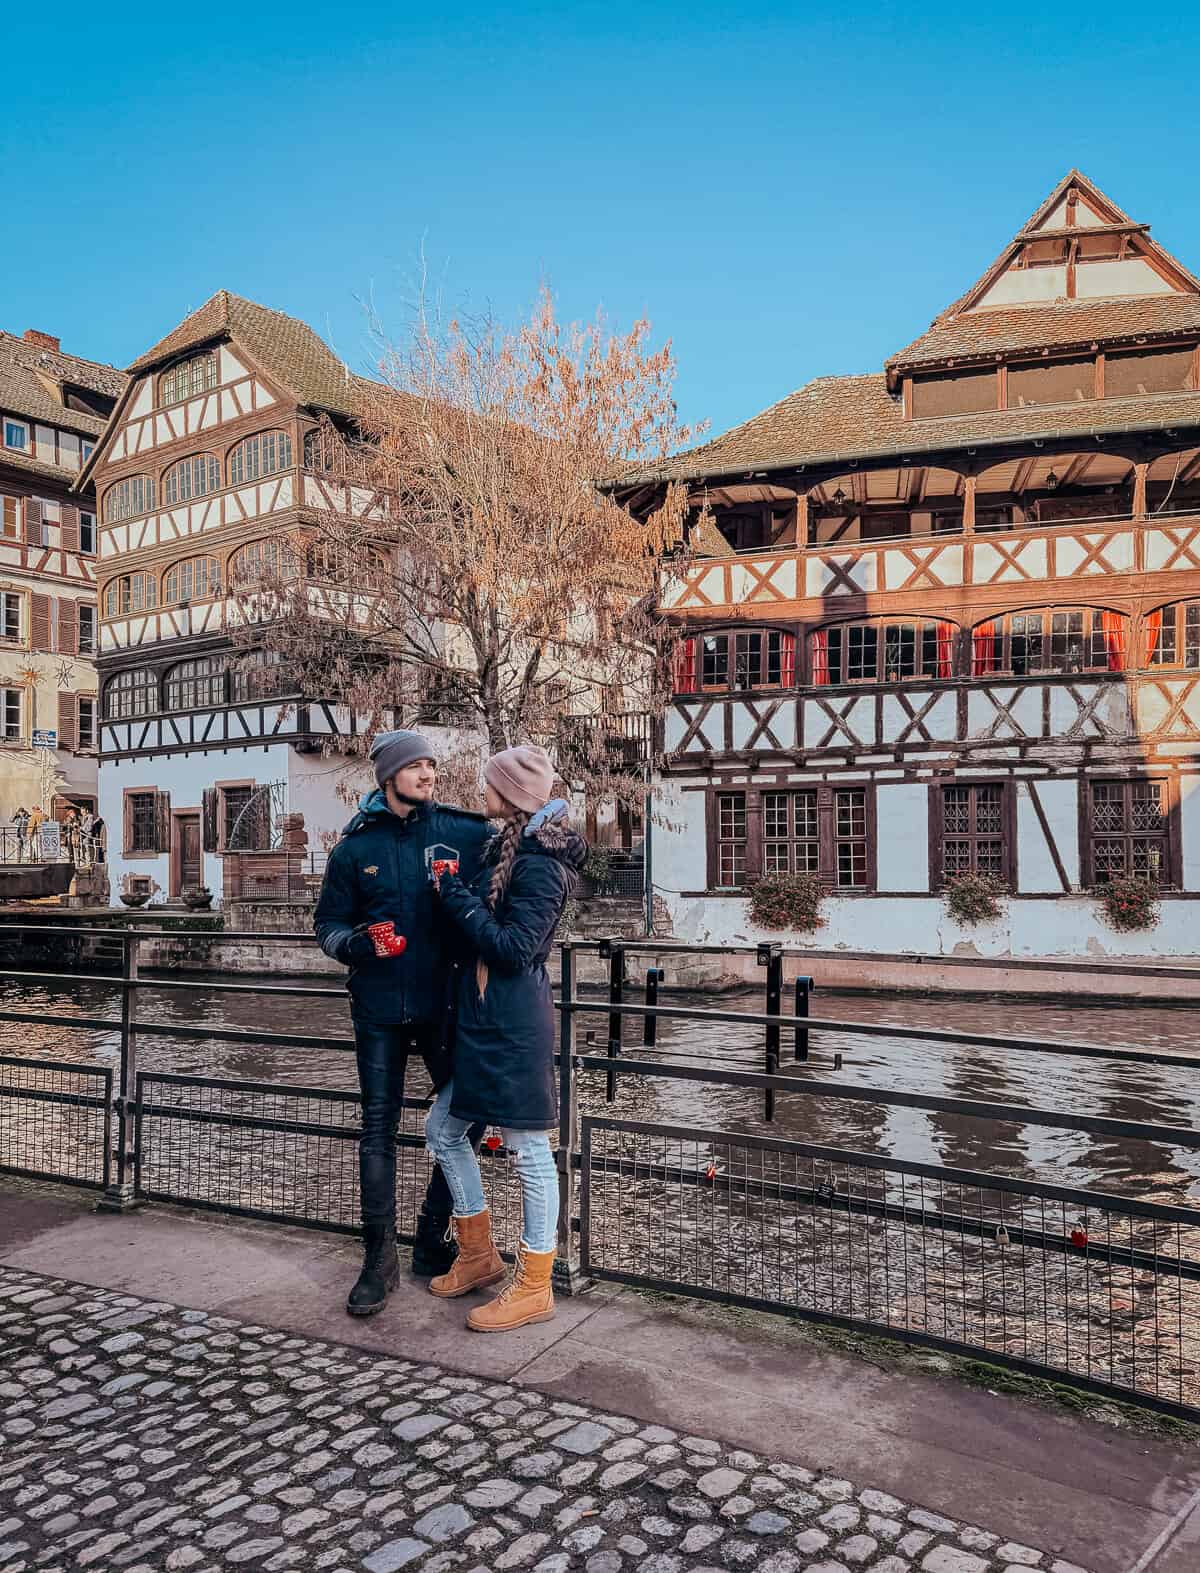 A couple enjoying mulled wine by a riverside, with traditional half-timbered houses in the background, evoking a romantic European winter scene.